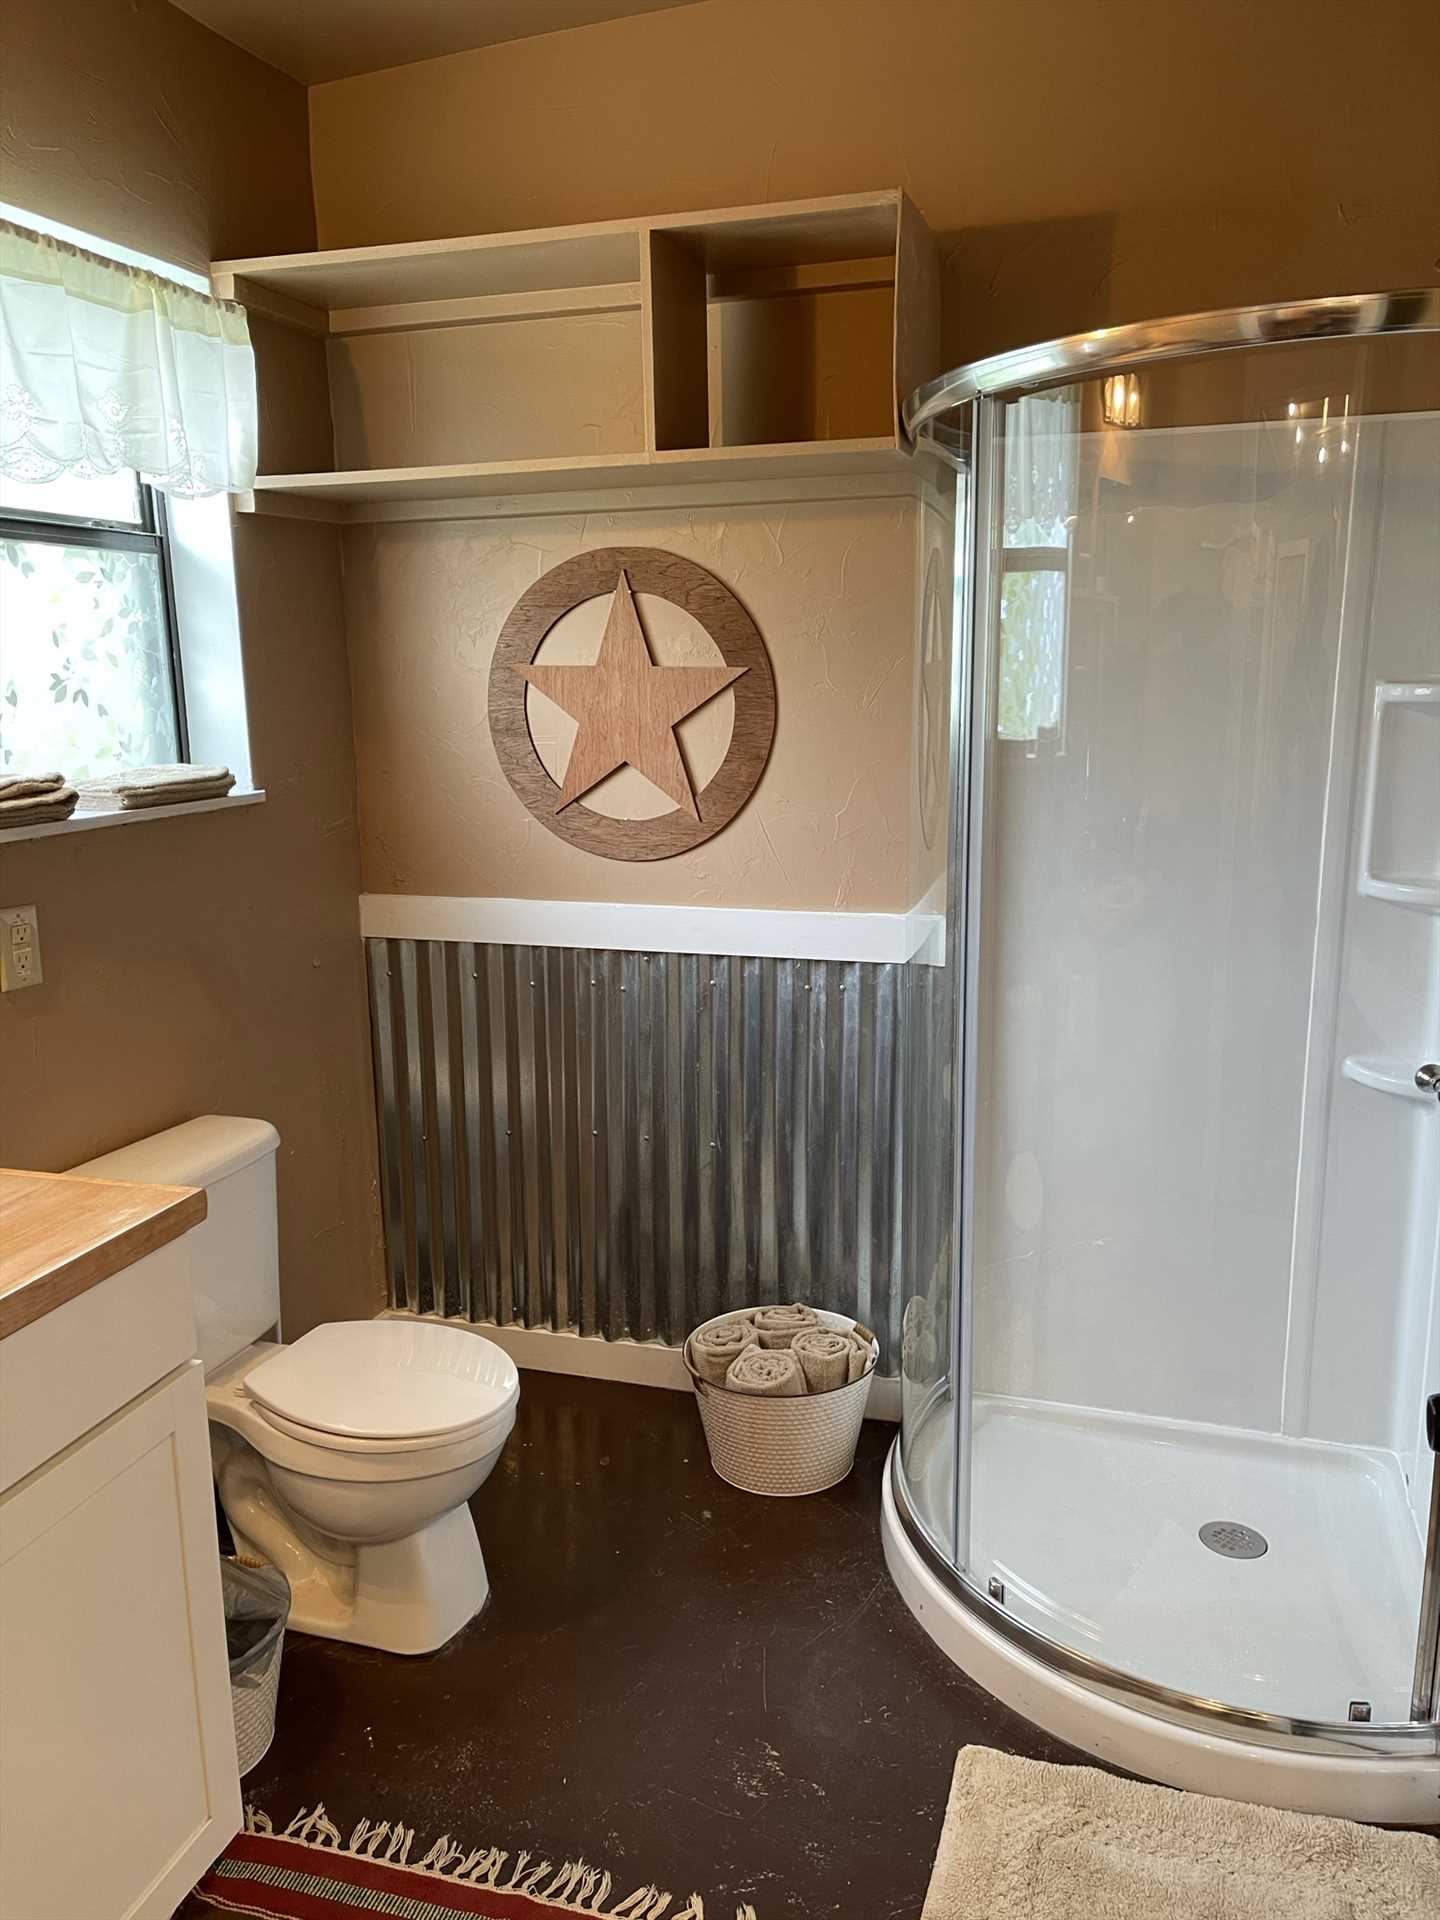                                                 A modern and unique circular shower stall is the centerpiece of the full bath at the Retreat.